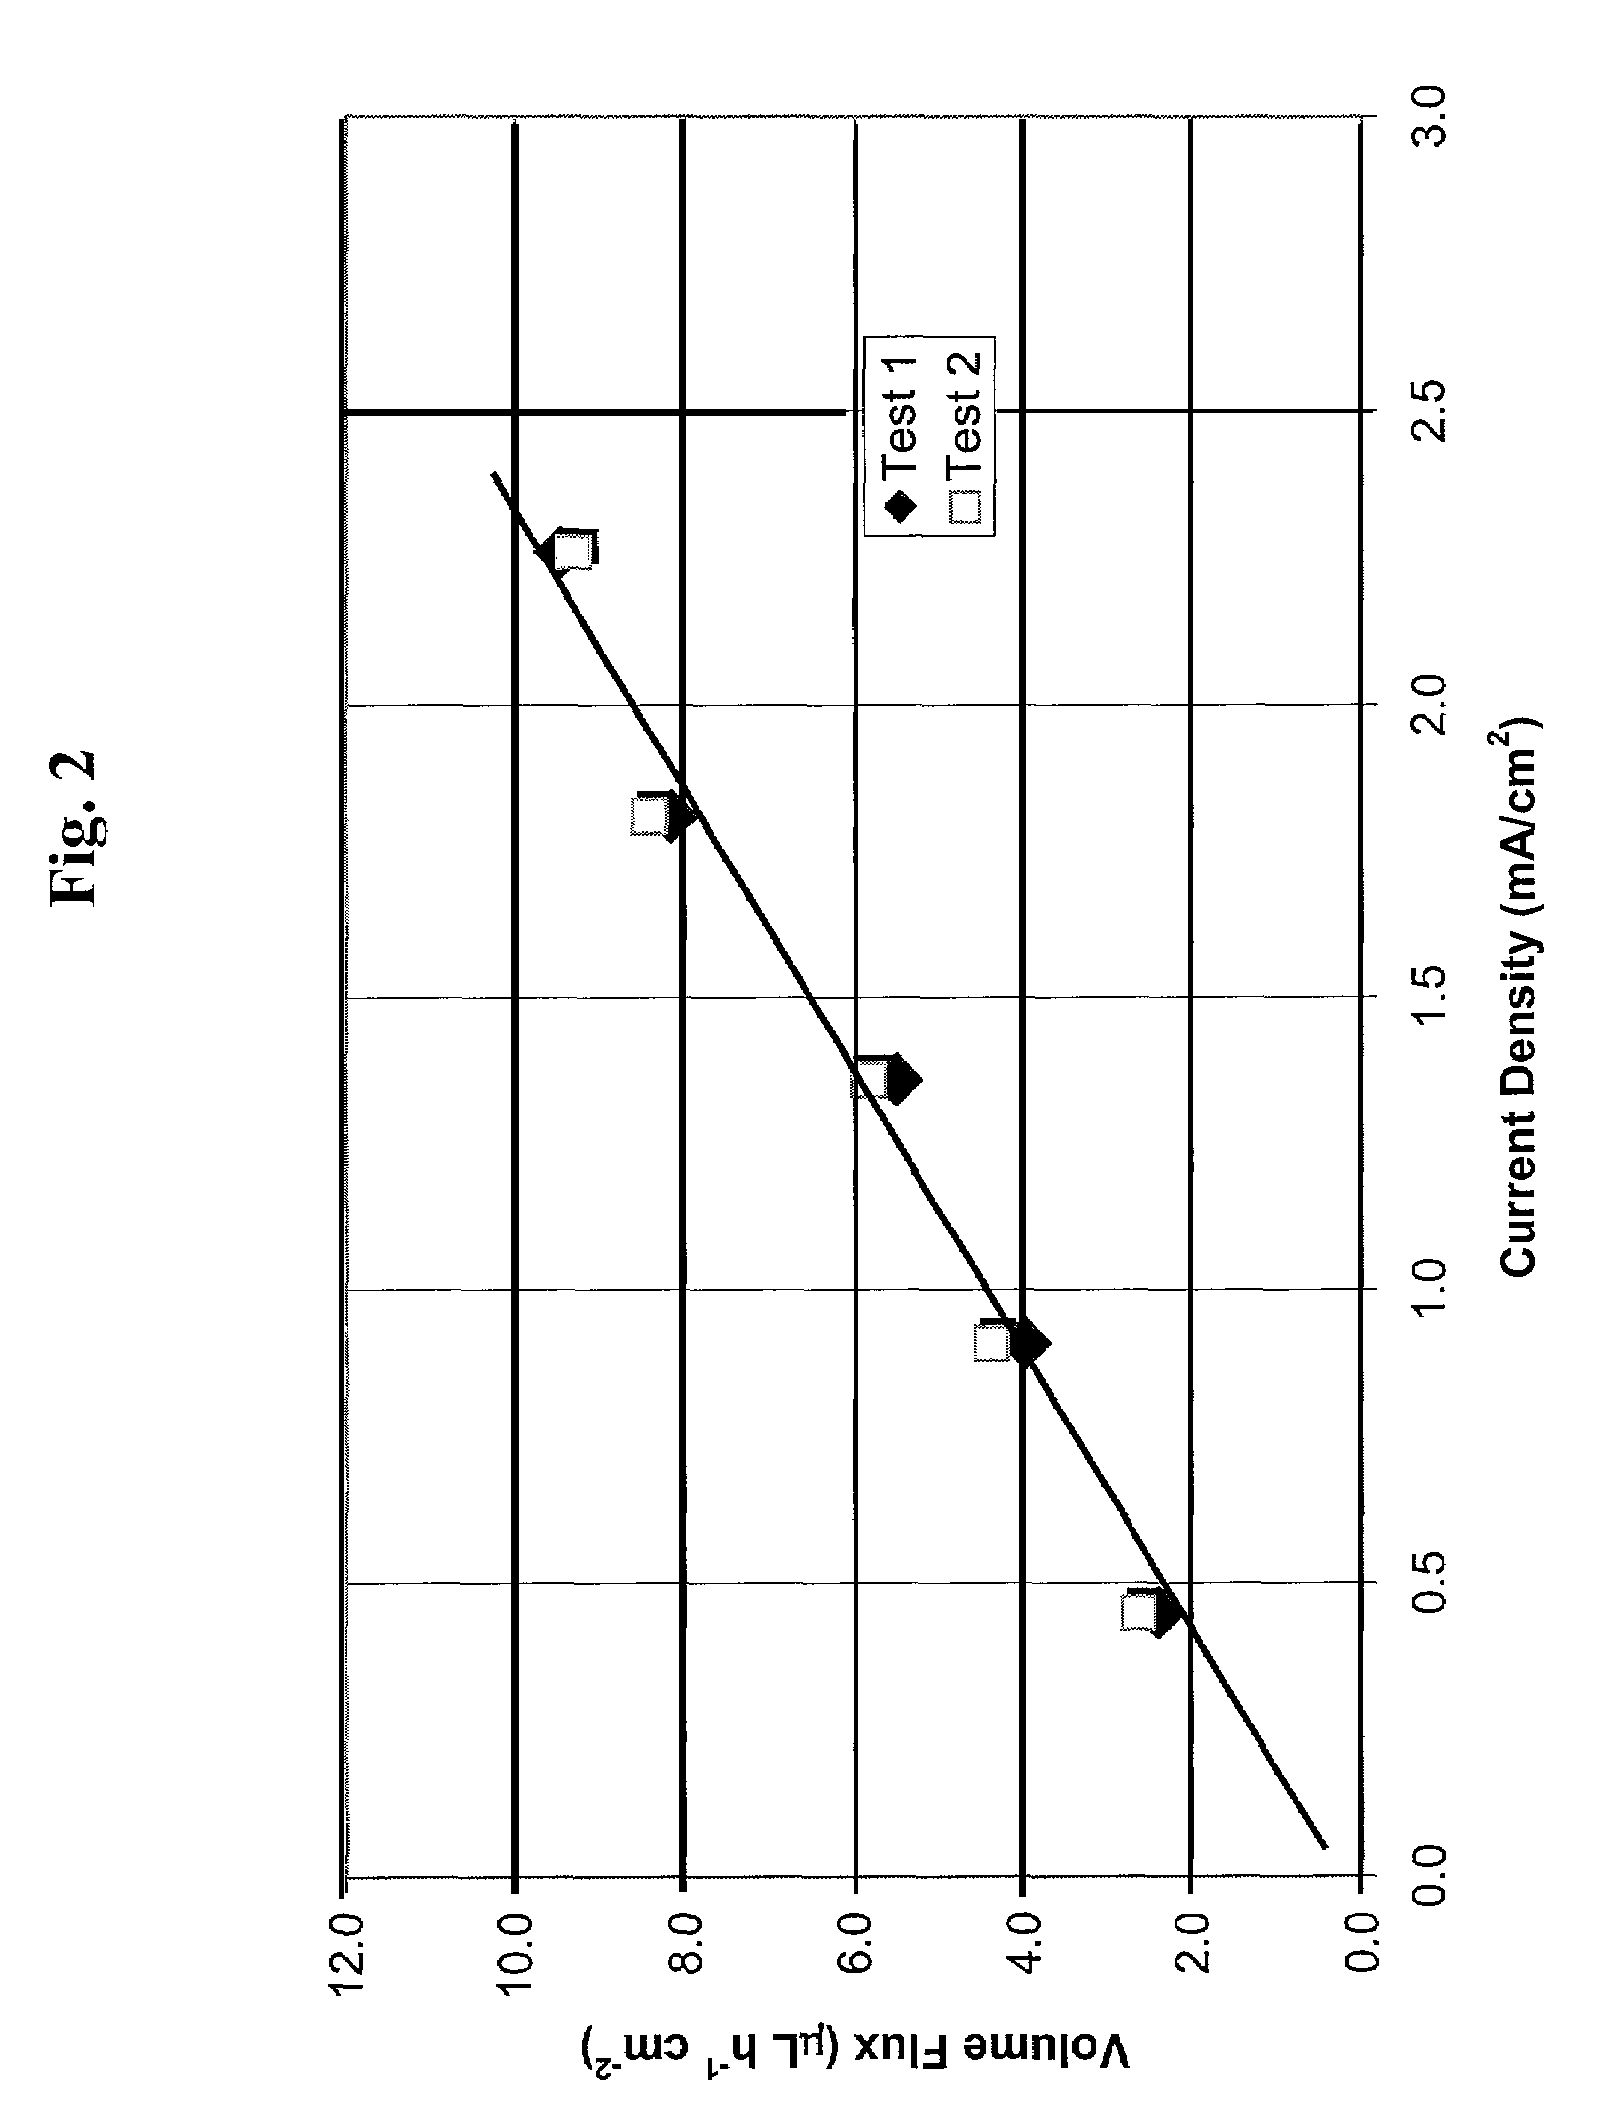 Fluid delivery device having an electrochemical pump with an anionic exchange membrane and associated method